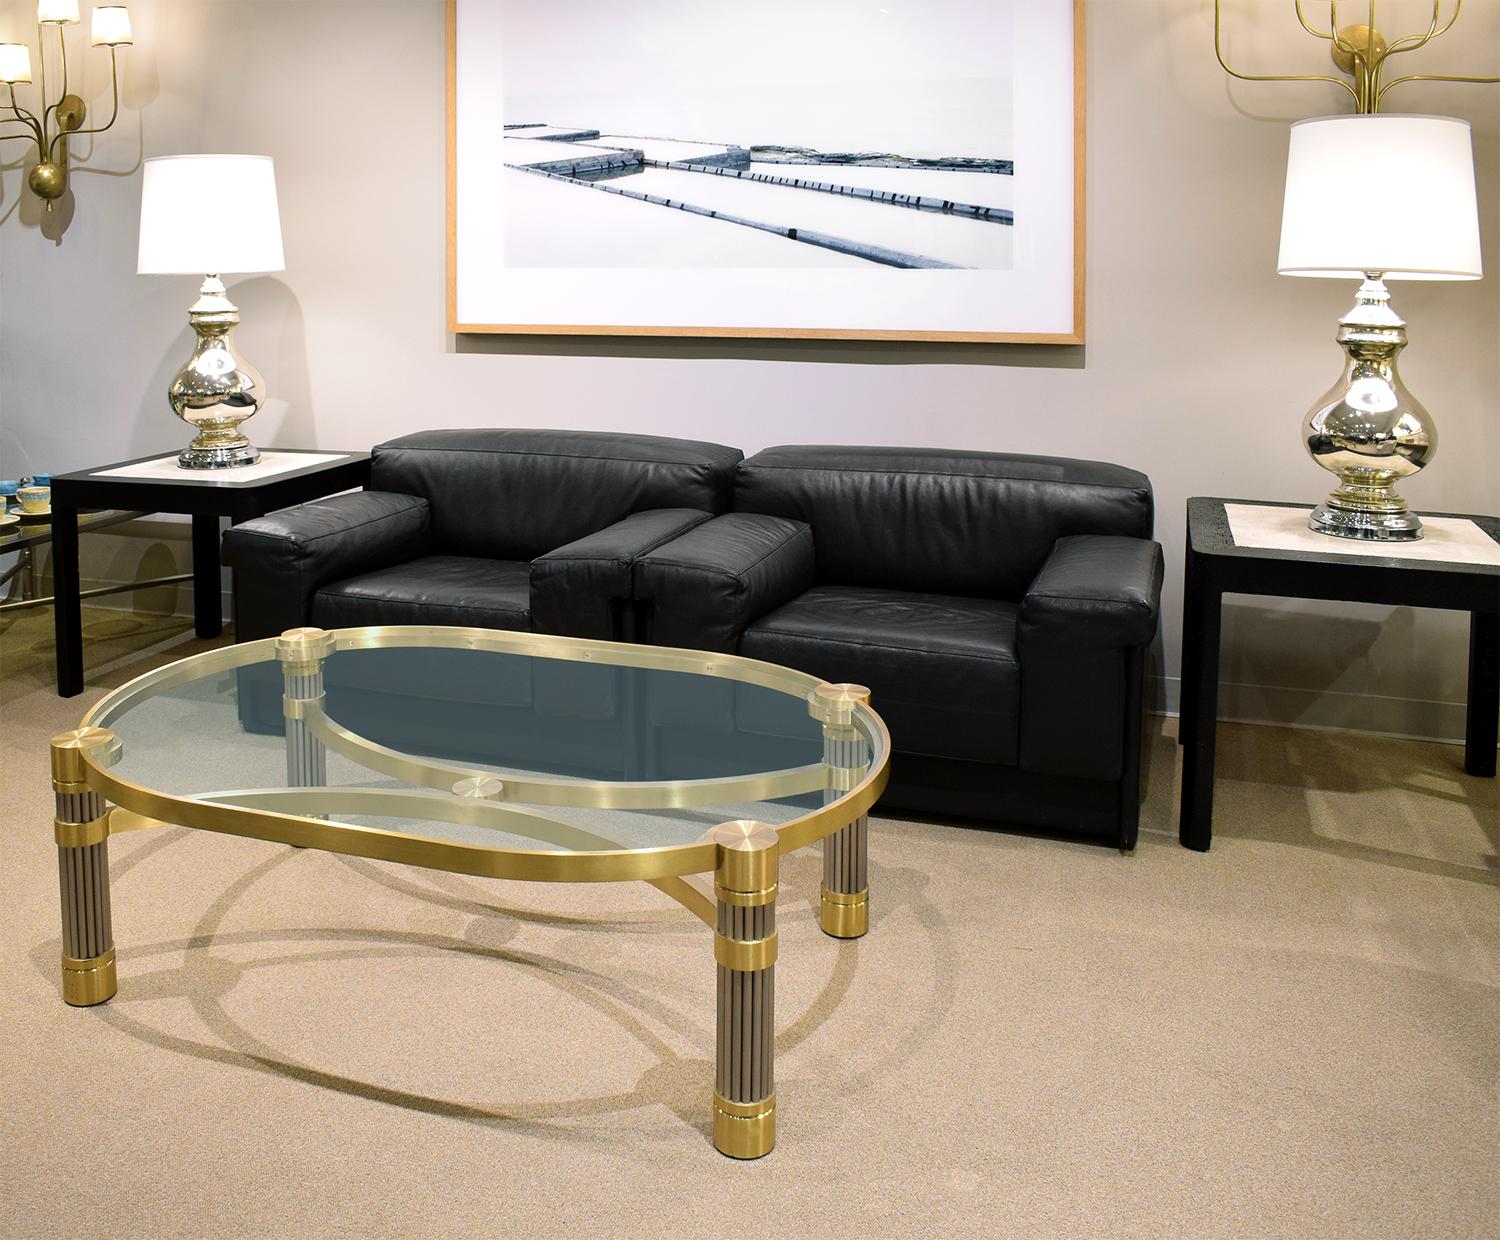 Ron Seff Large Coffee Table in Brushed Stainless Steel and Brass, 1980s In Excellent Condition For Sale In New York, NY